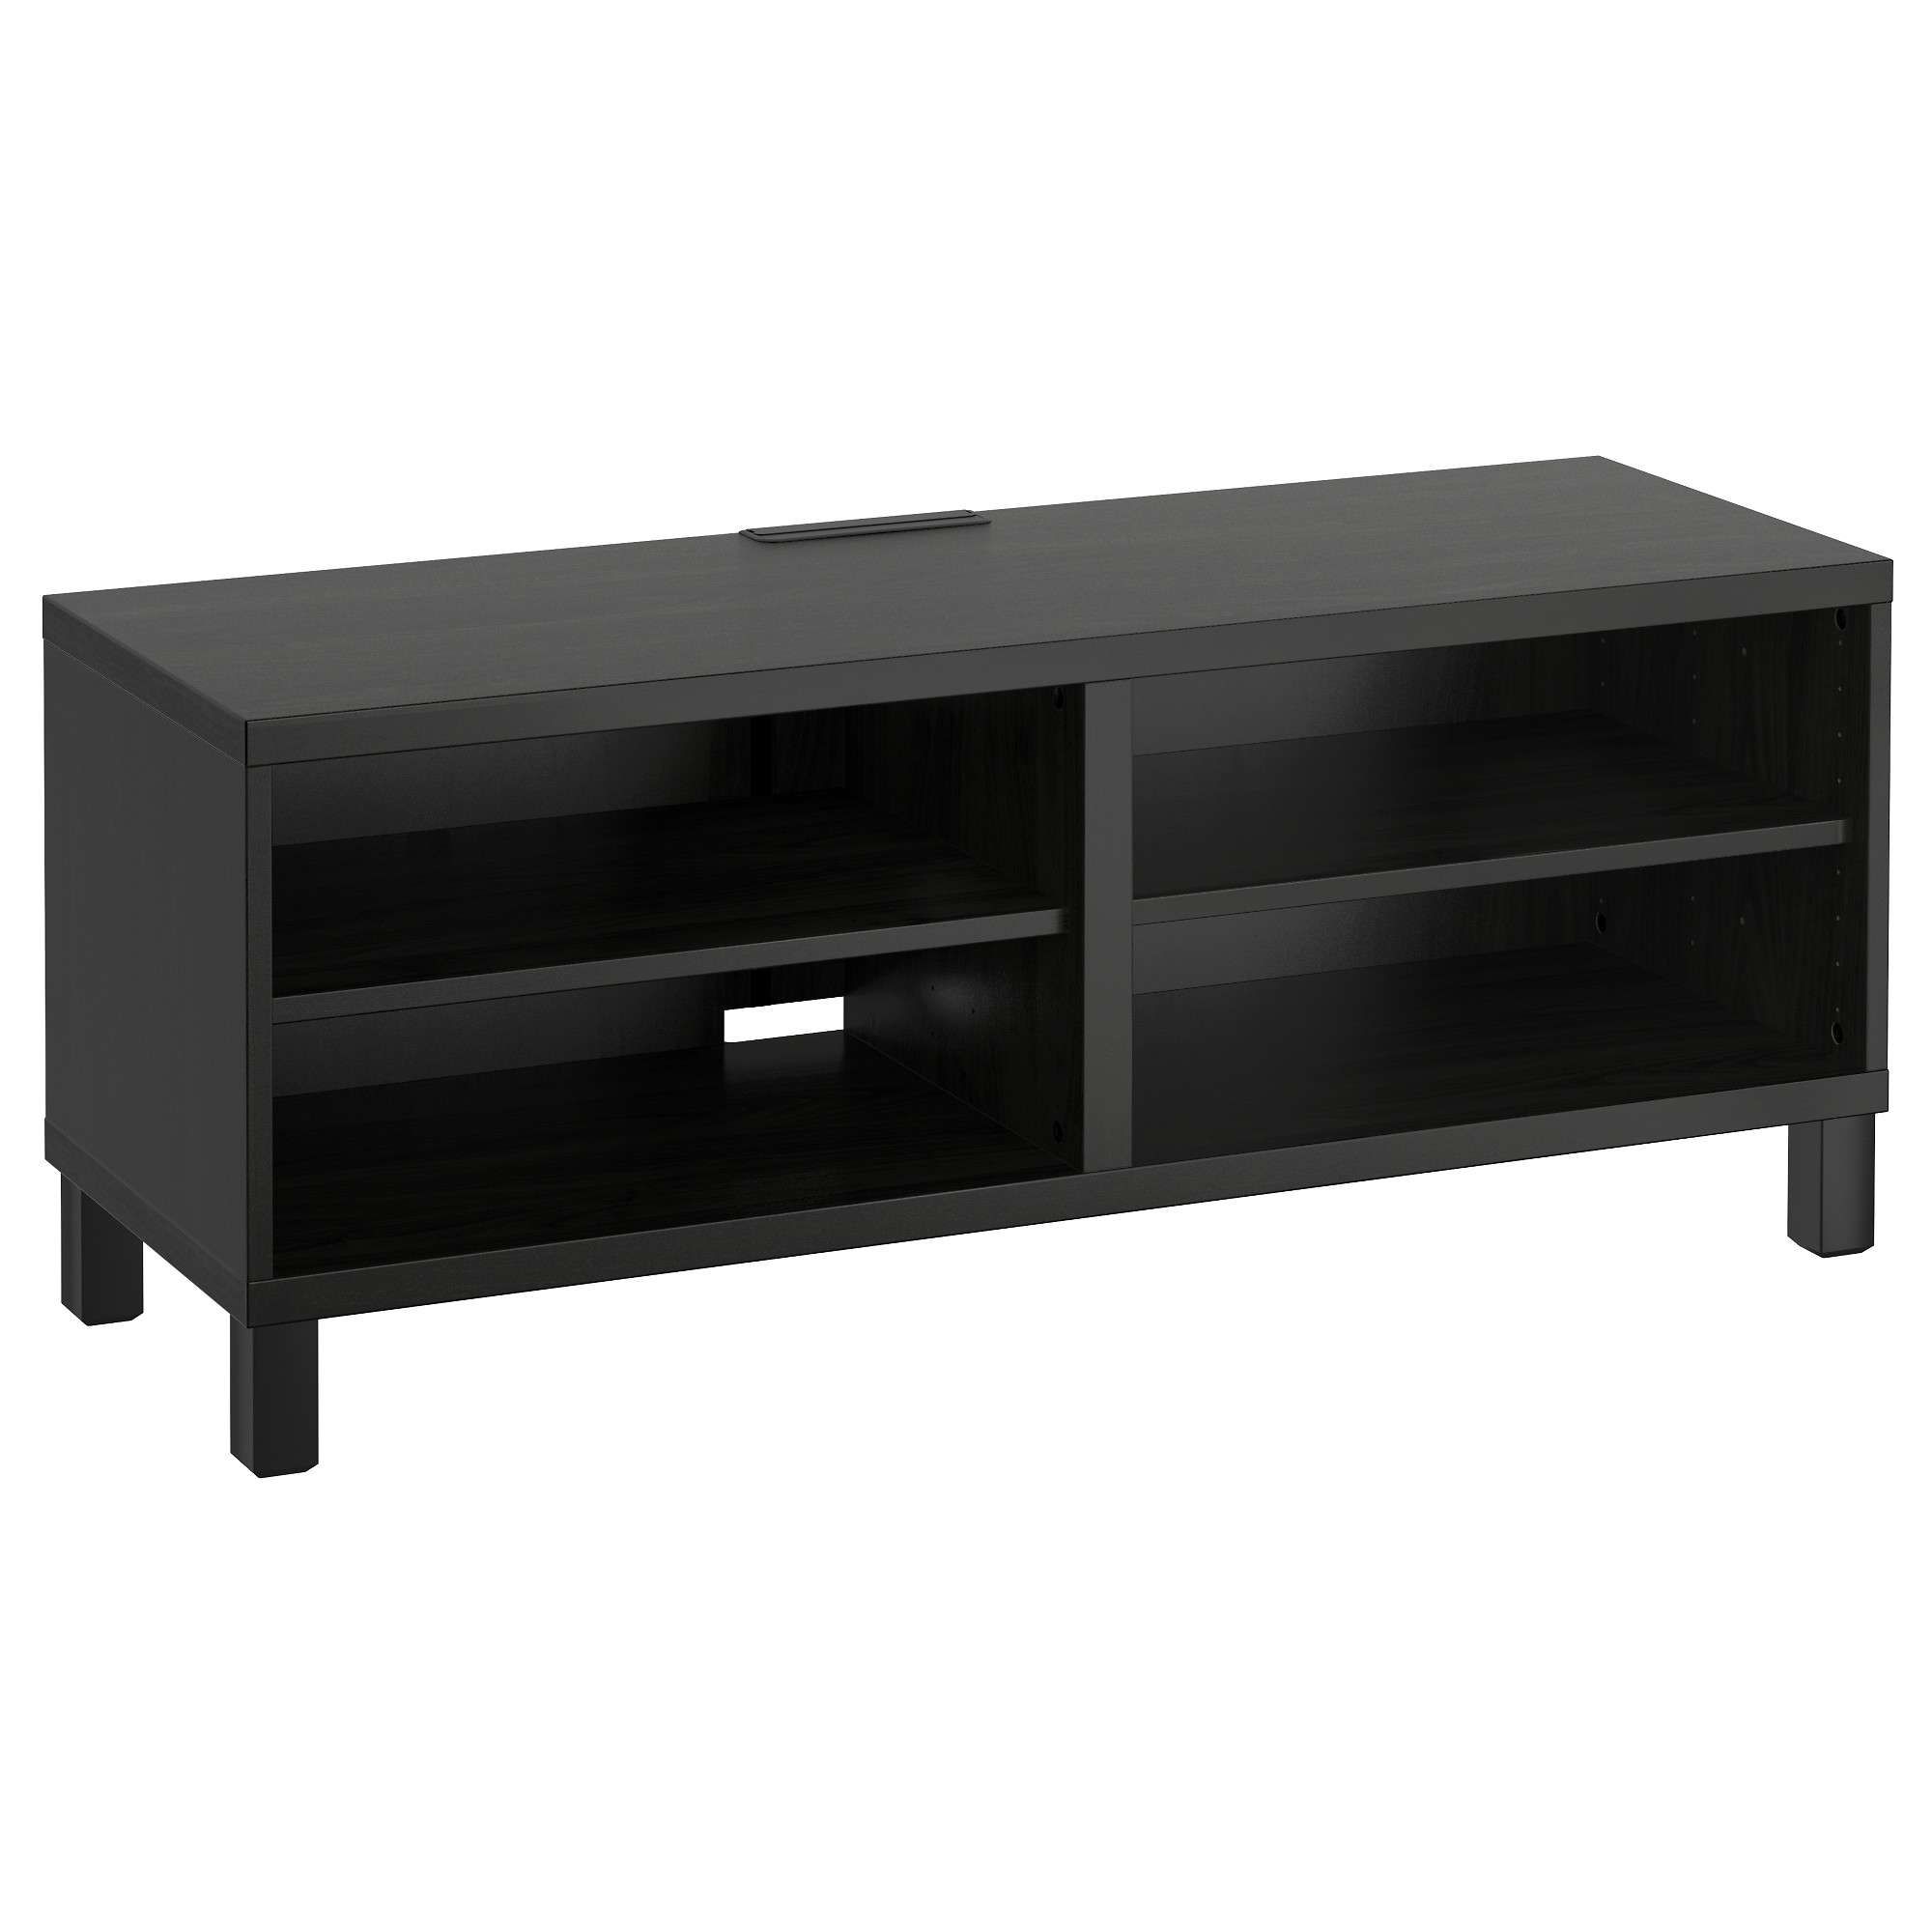 Featured Photo of 15 Best Collection of 24 Inch Deep Tv Stands